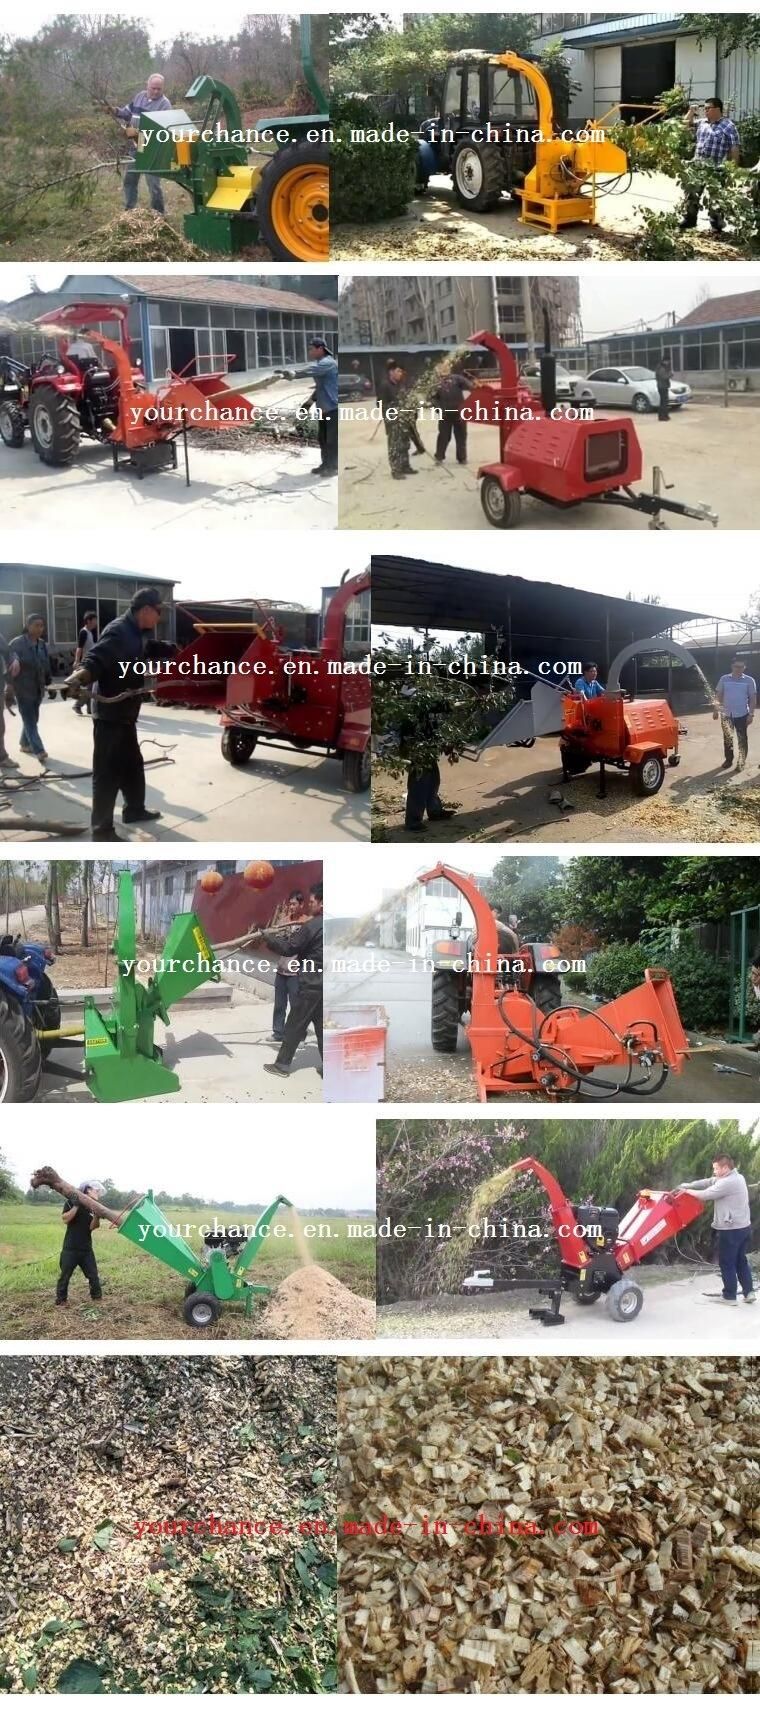 China Factory Supply Tractor Mounted Type and Selfpower Towable Type Wood Chipper with ISO Ce Certificate